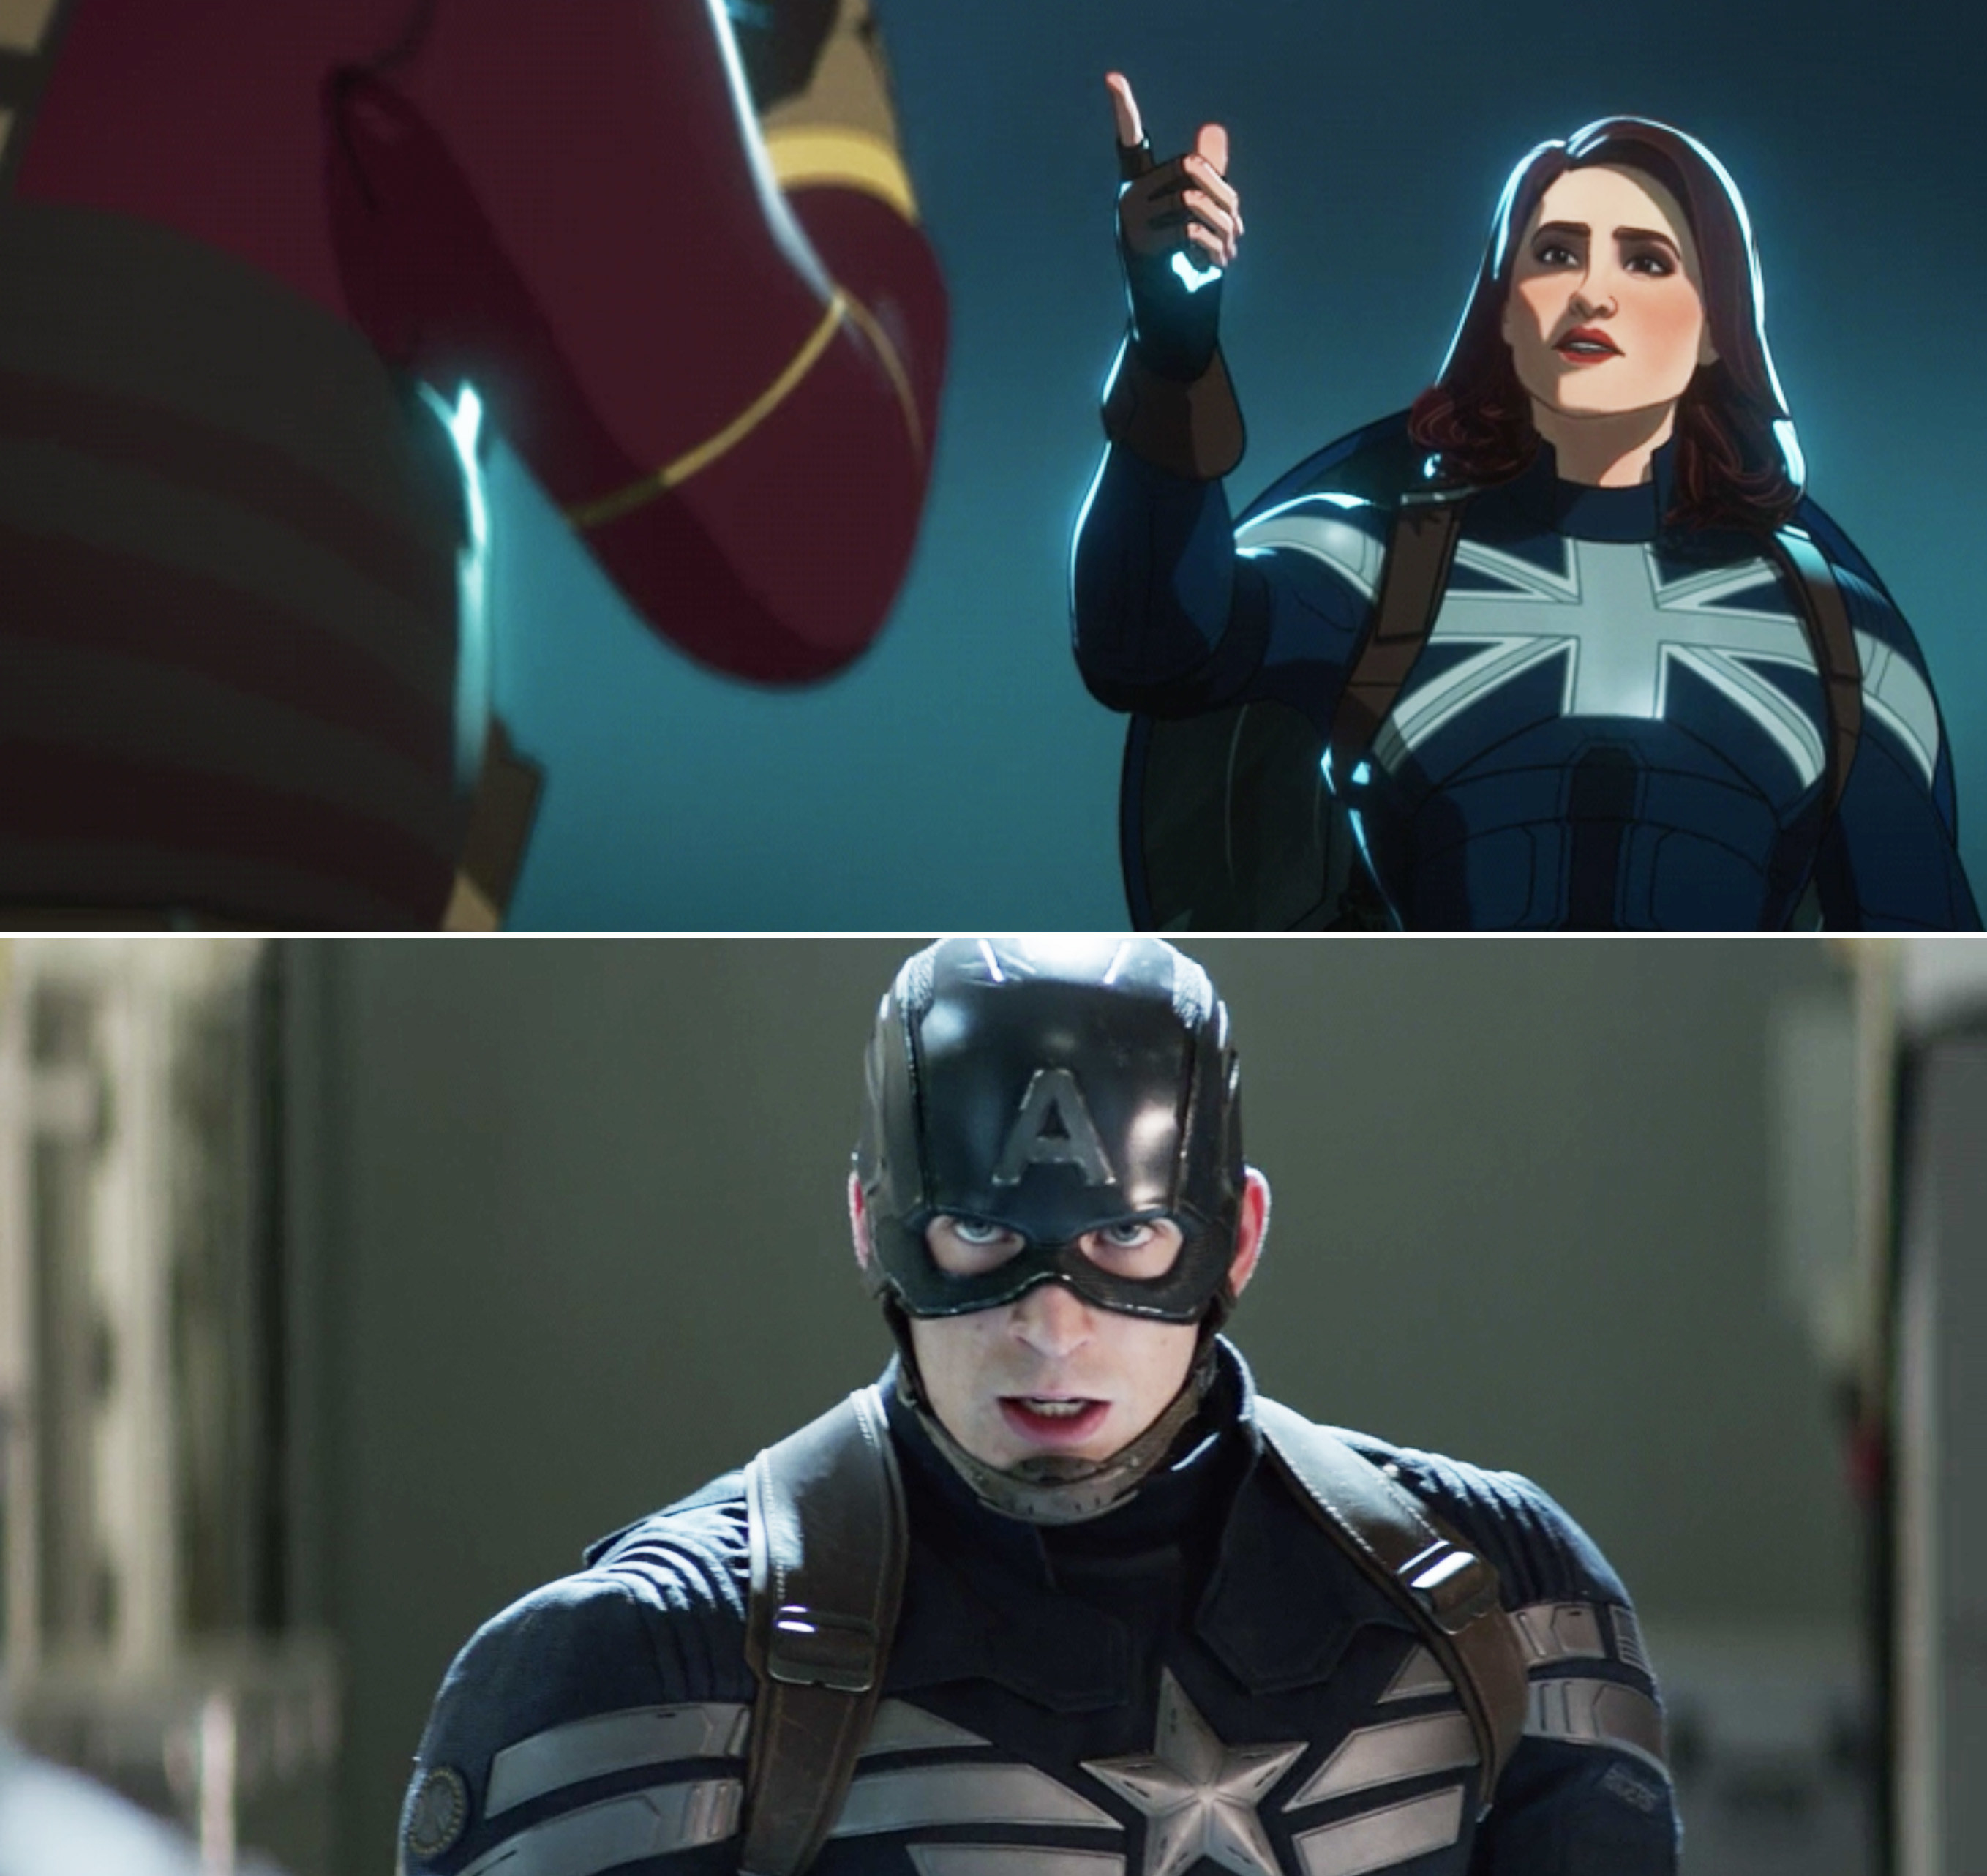 Peggy vs Steve wearing blue and silver suits